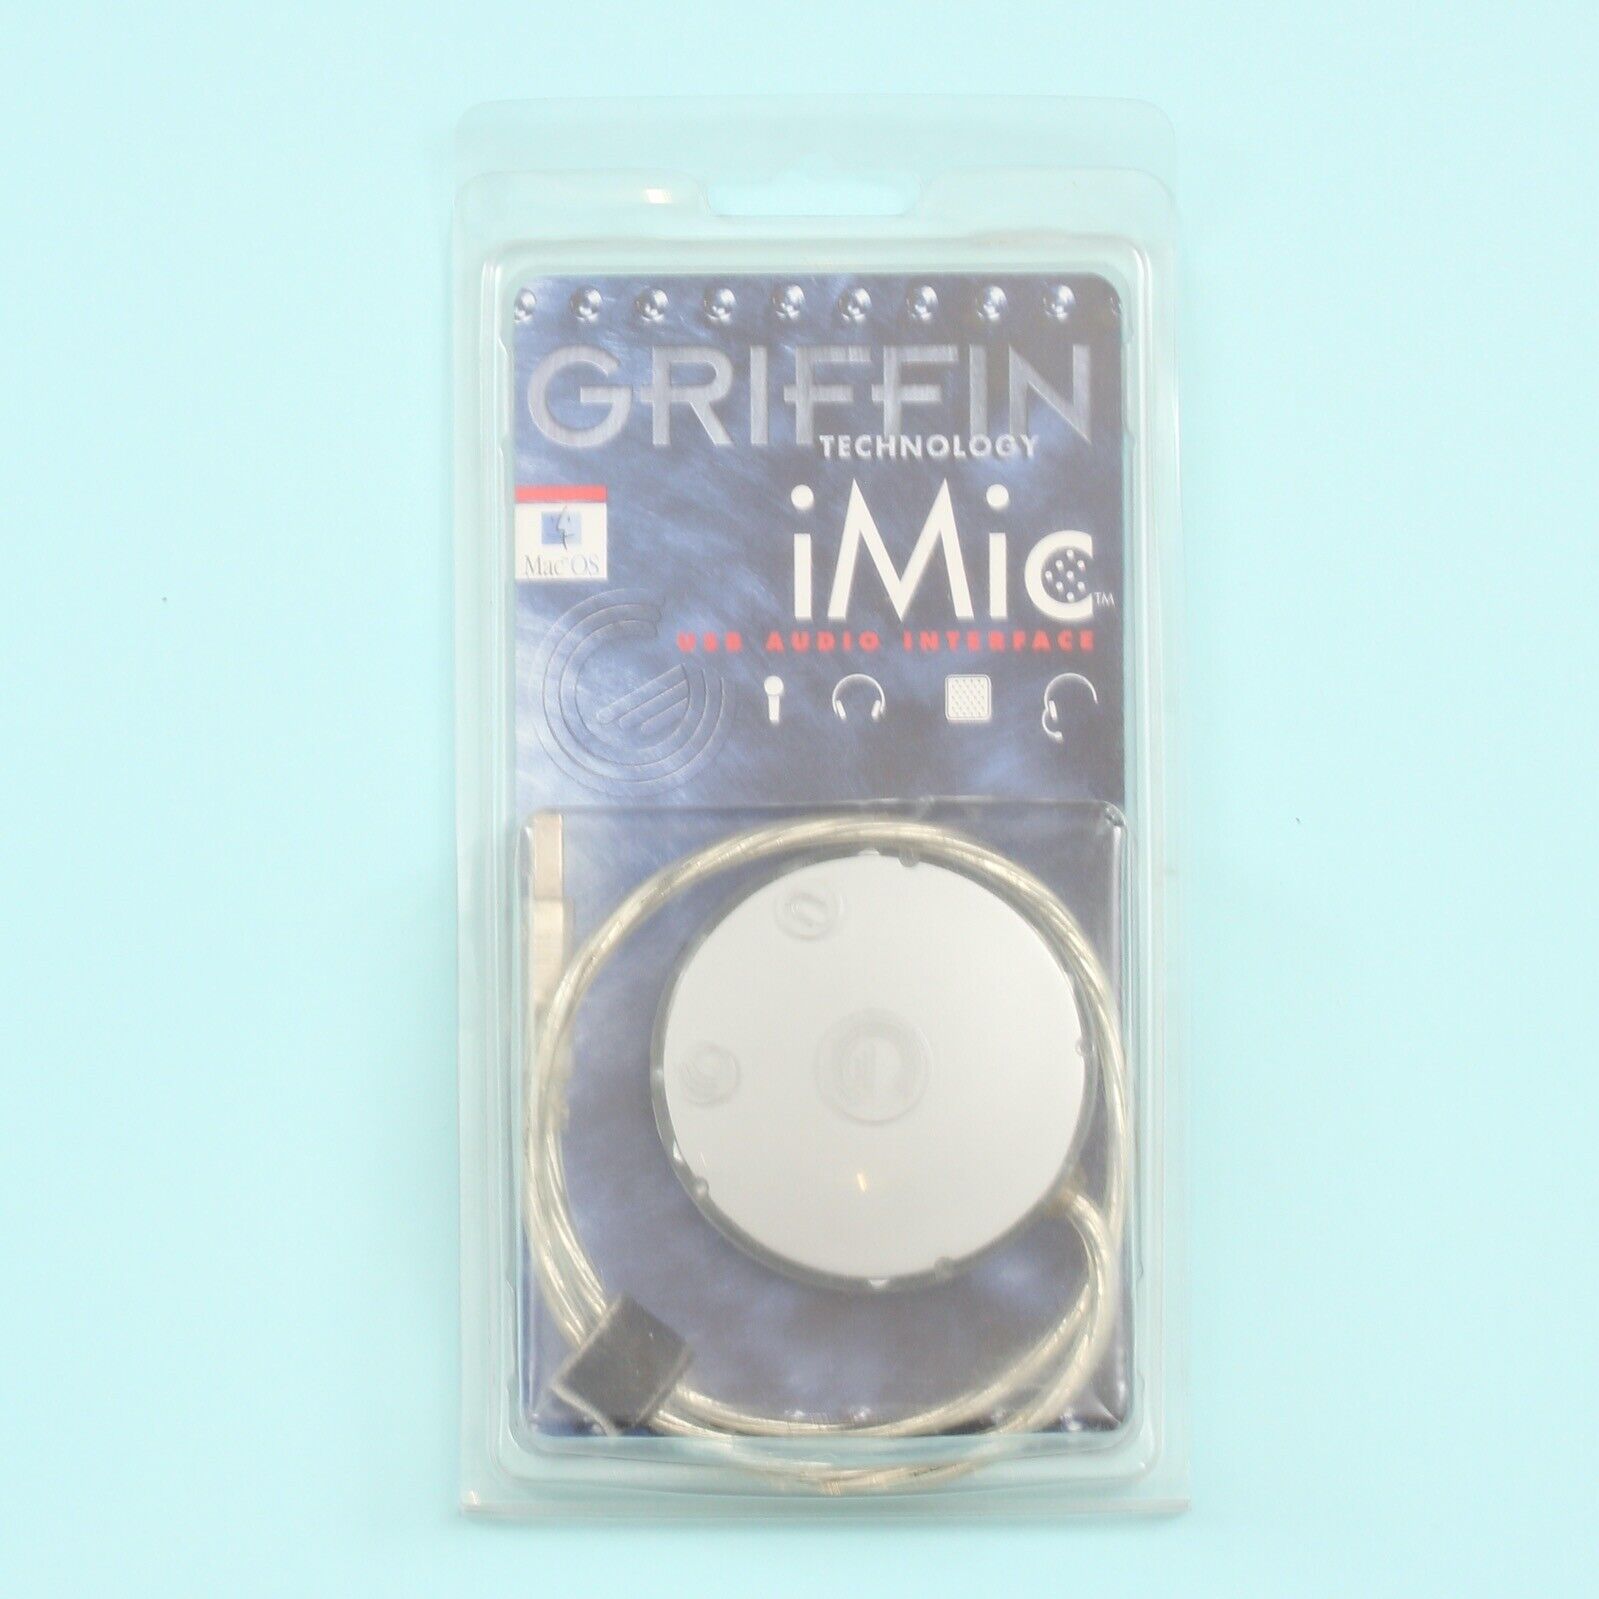 Vintage Griffin Technology iMic USB Audio Interface for Mac OS 9.0.4 or Greater